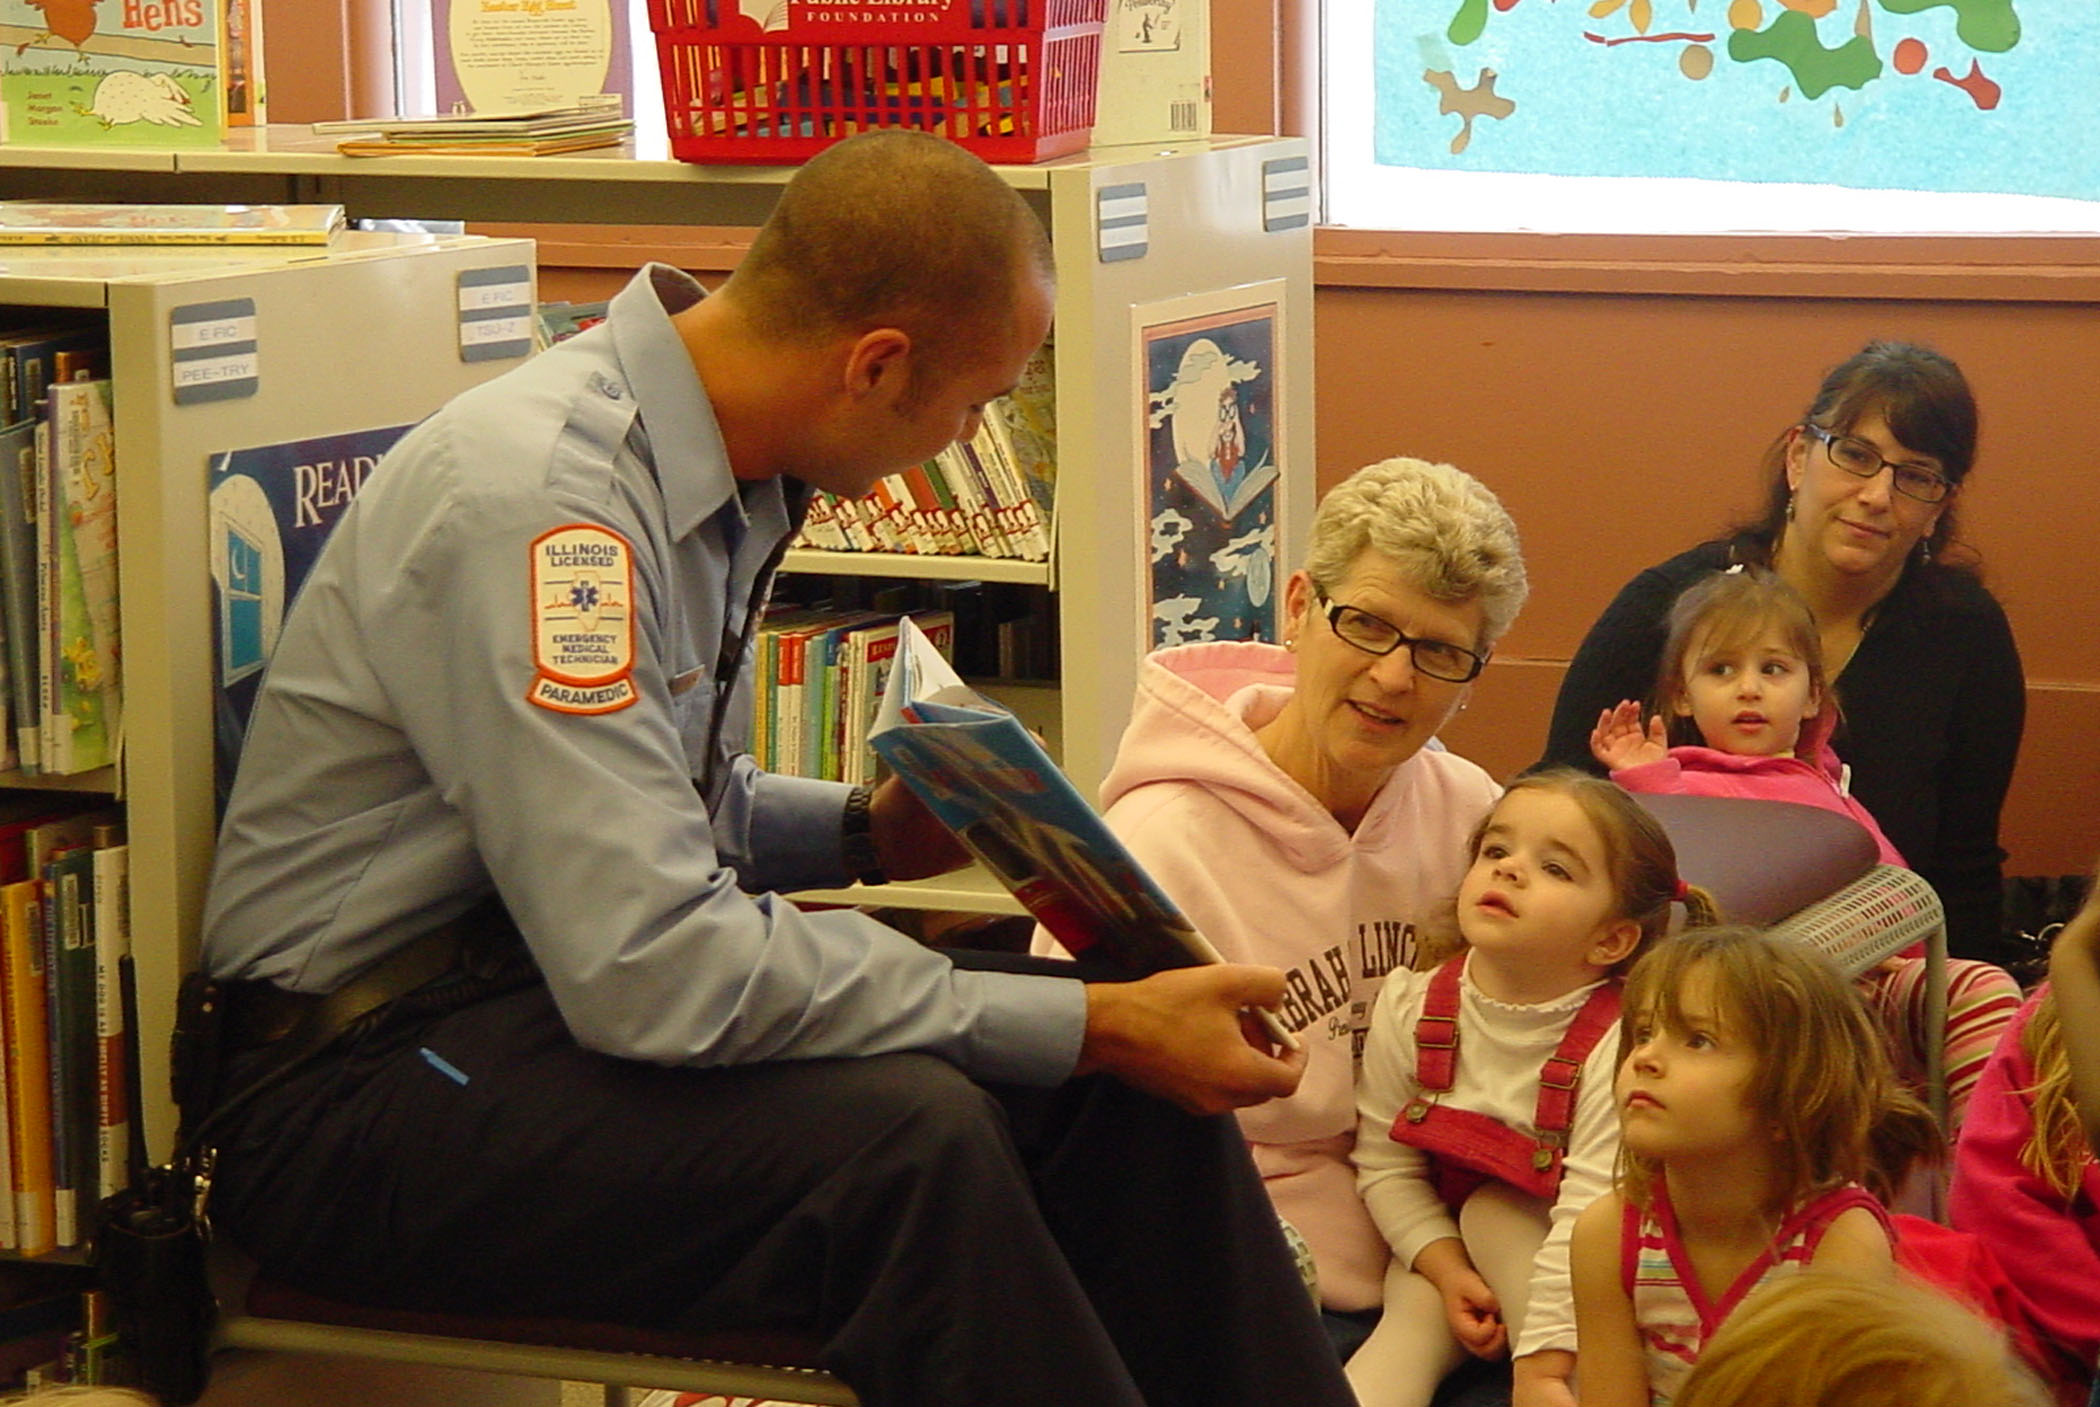 Rock Island firefighter Chad Chindlund of the Central Fire Station reads to children at Rock Island (Ill.) Public Library’s 30/31 branch. The library’s Children’s Department hosted special “Community Helper” storytimes with volunteer readers from the police and fire departments.